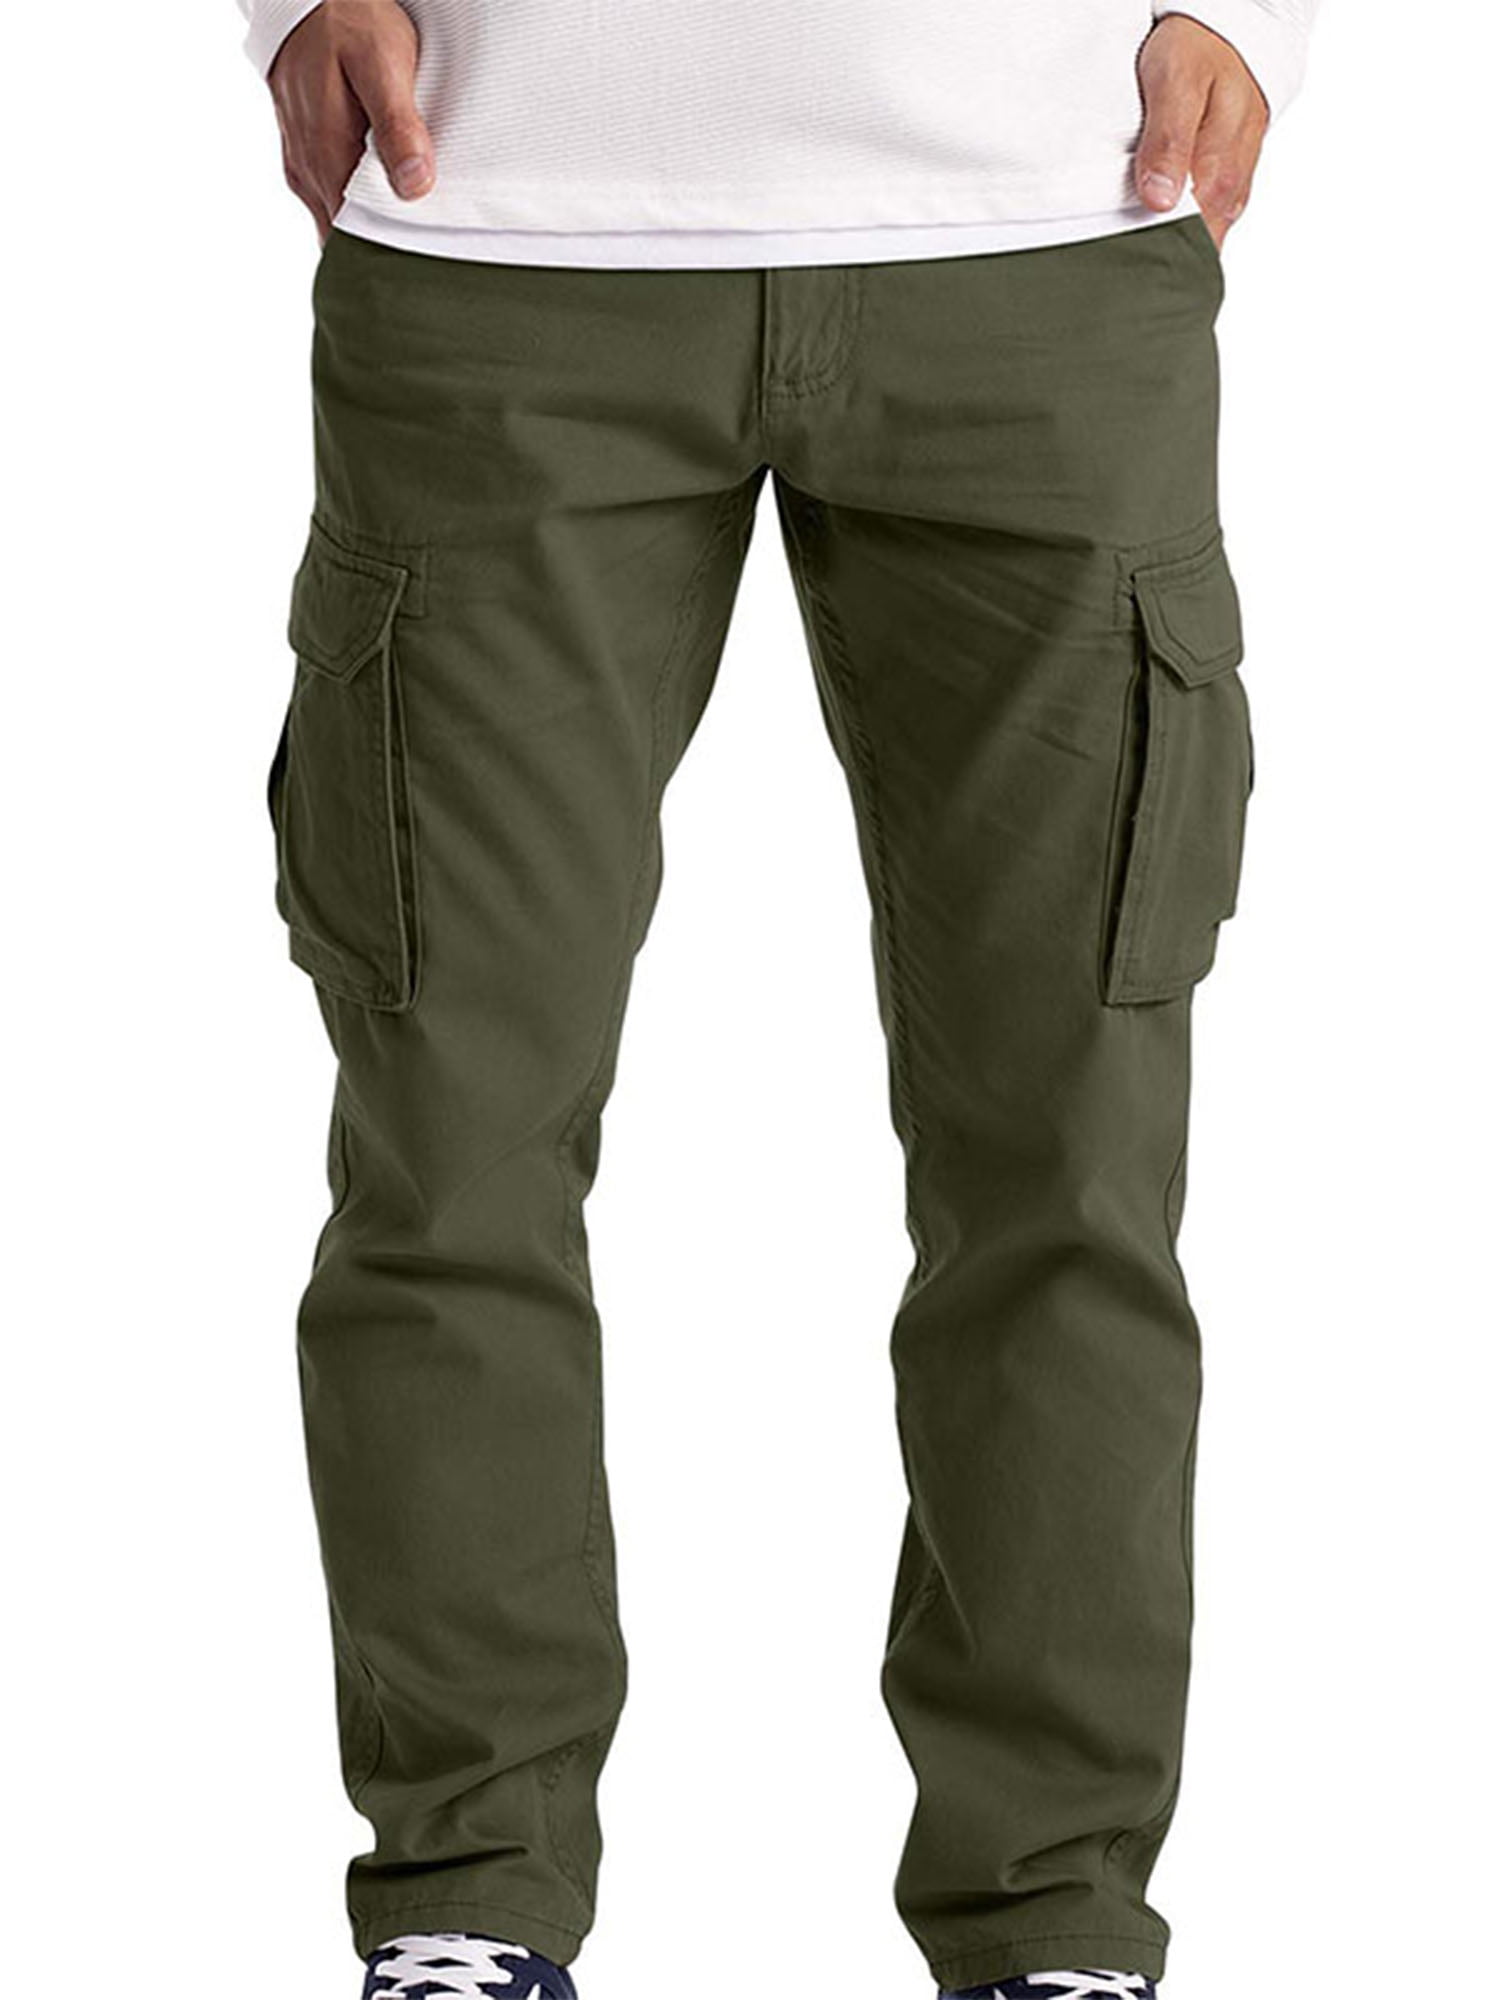 Viodia Men's Quick Dry Hiking Cargo Pants Lightweight Camping Pants for Men UPF50 Outdoor Pants with Pockets 